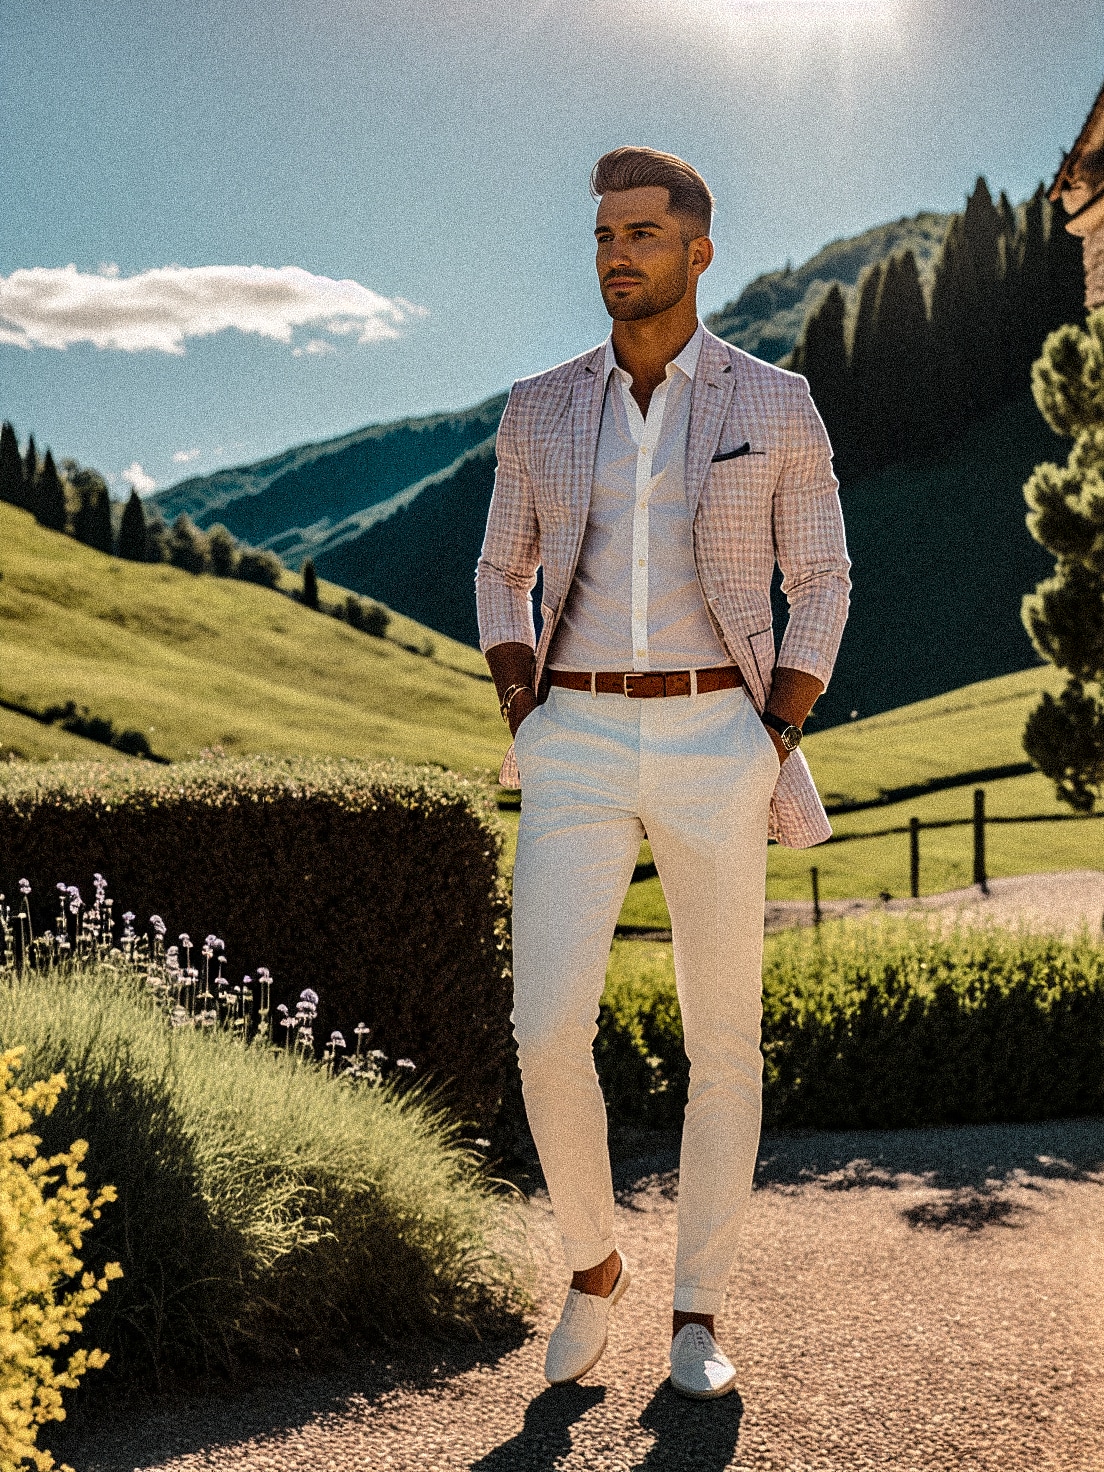 Description: A man dressed in white trousers and a pink blazer.